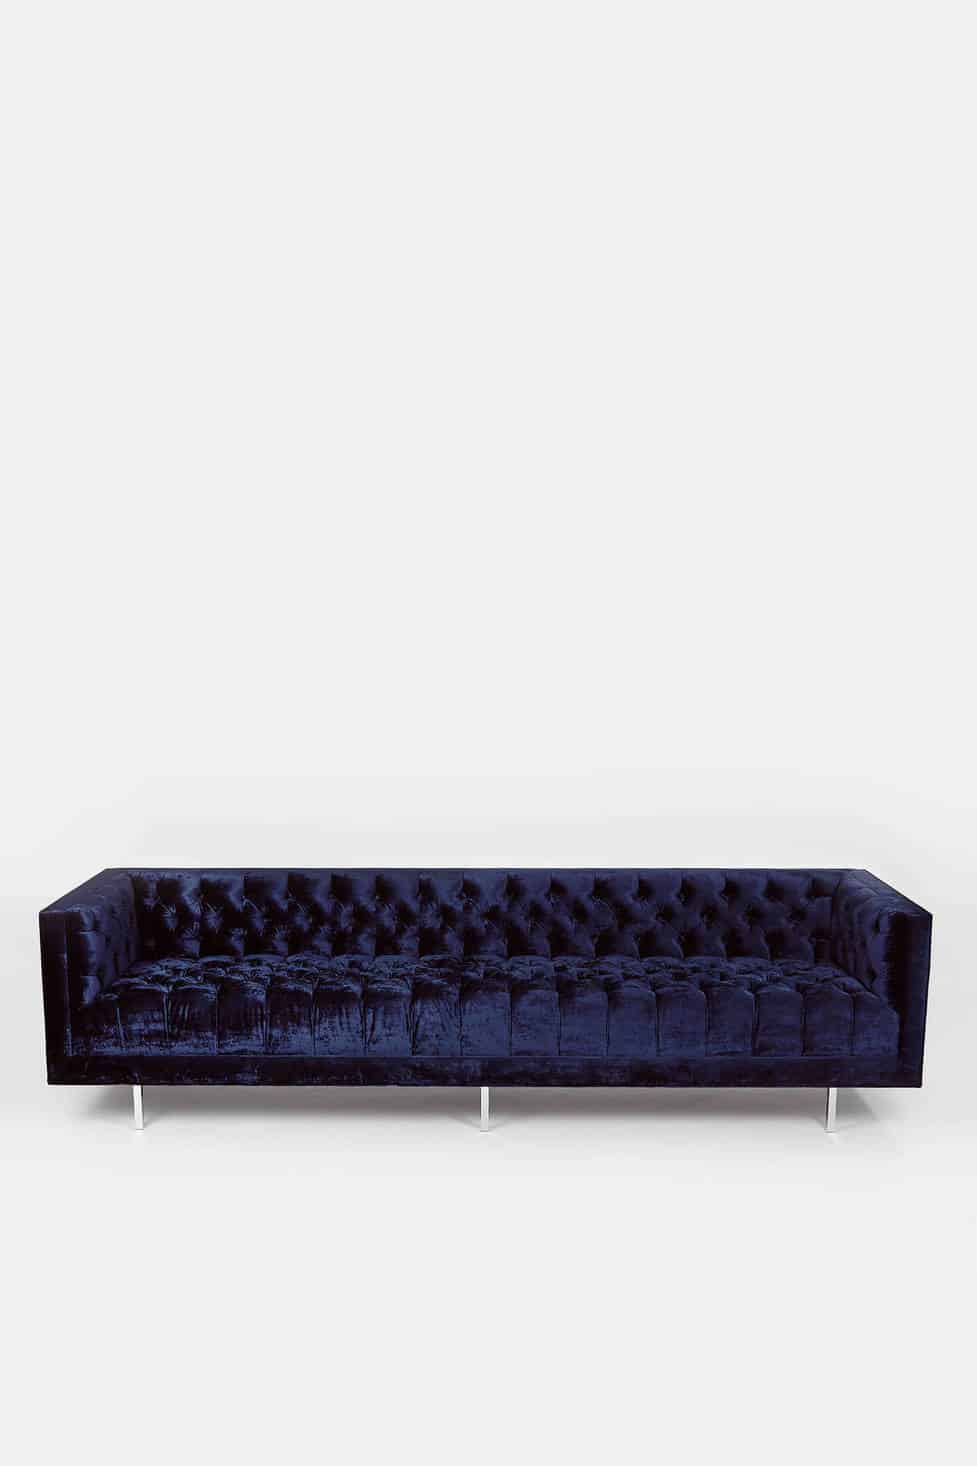 Ludlow Sofa from The Line